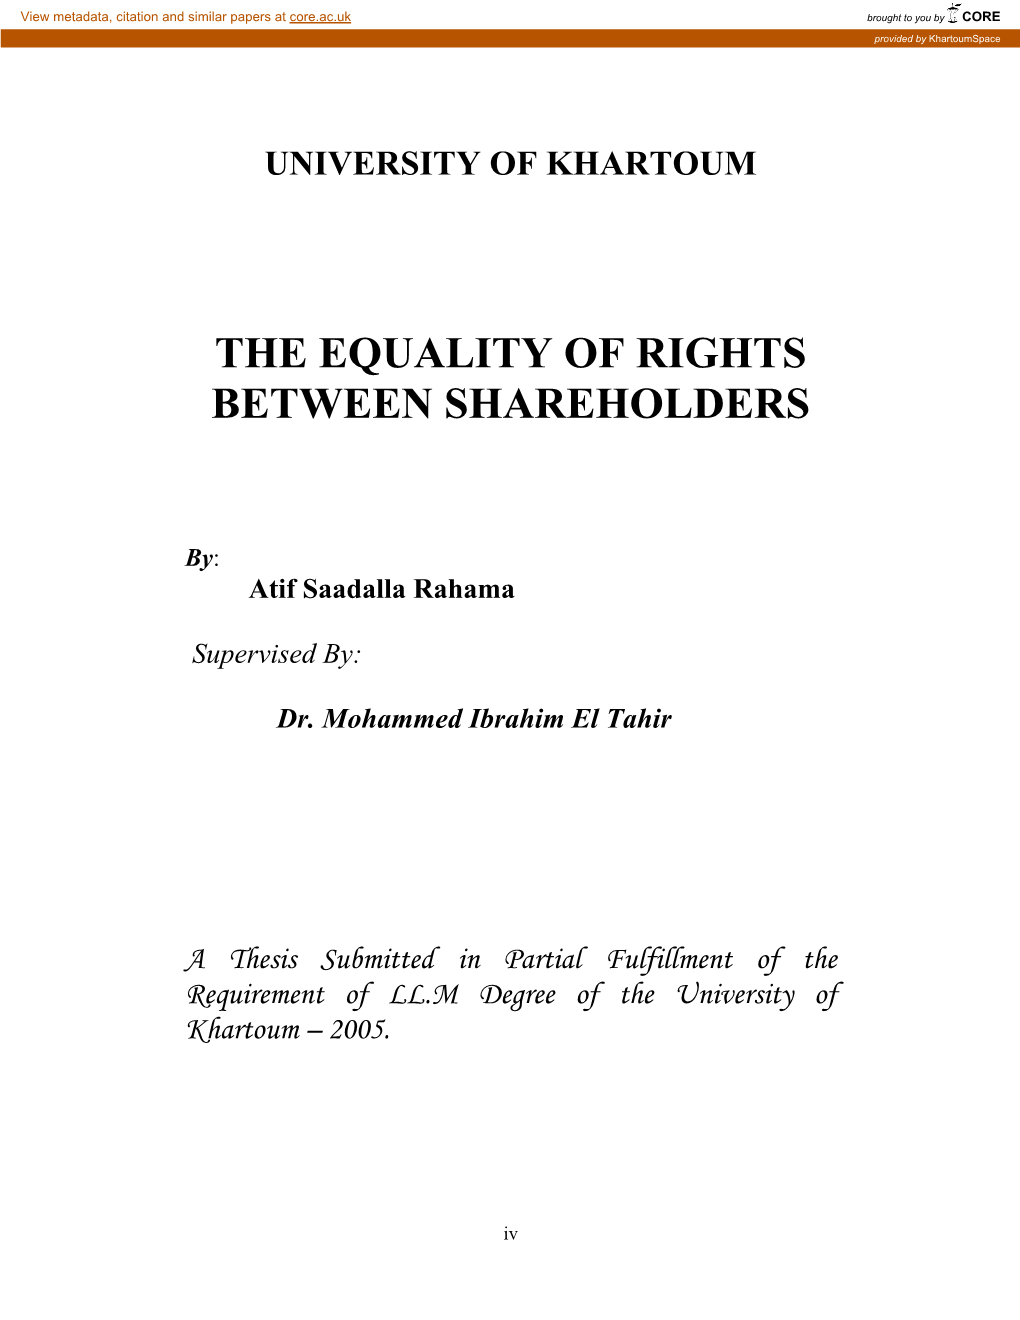 The Equality of Rights Between Shareholders